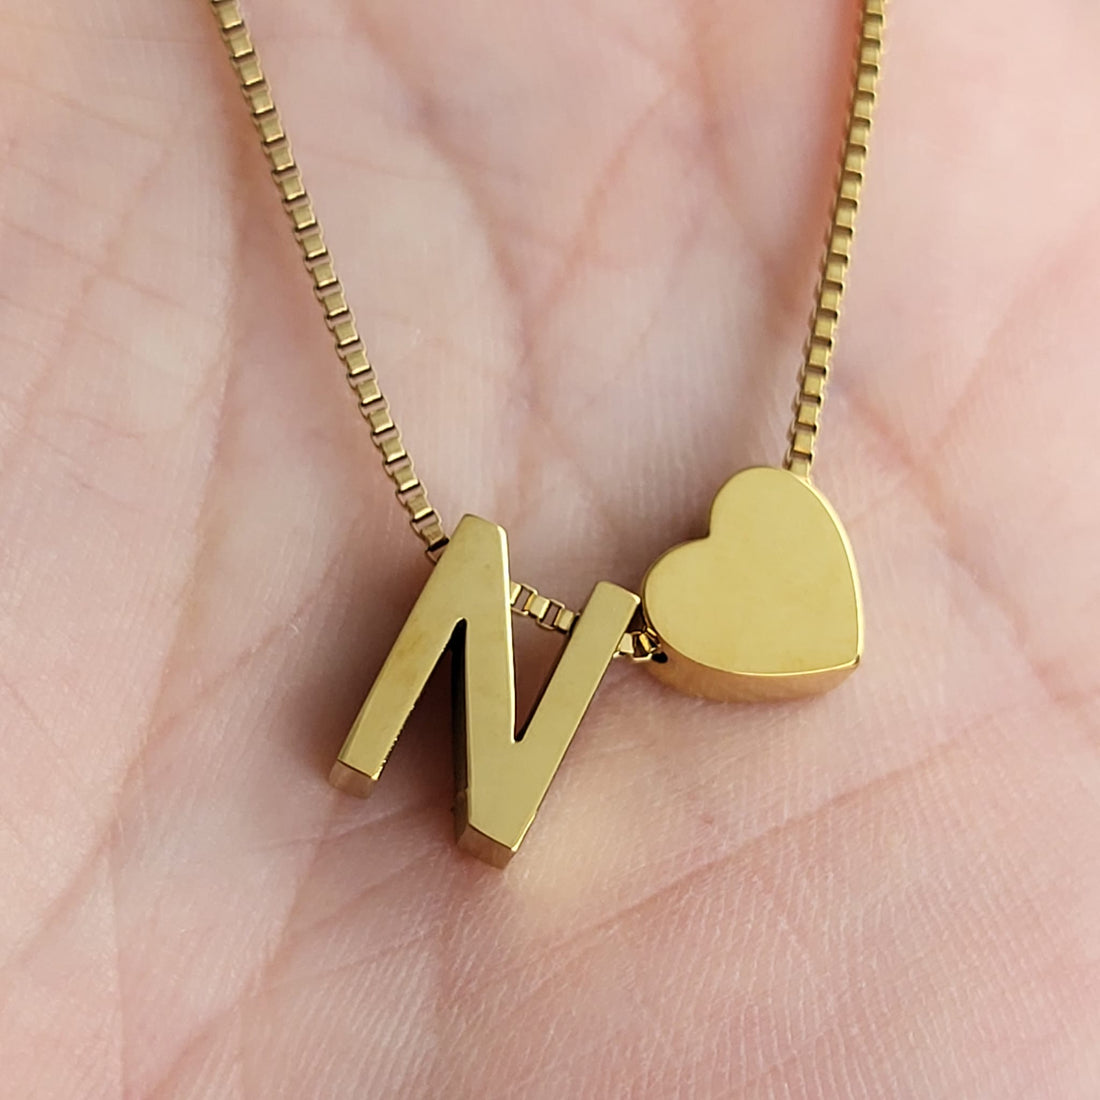 Necklace Initials Love - N